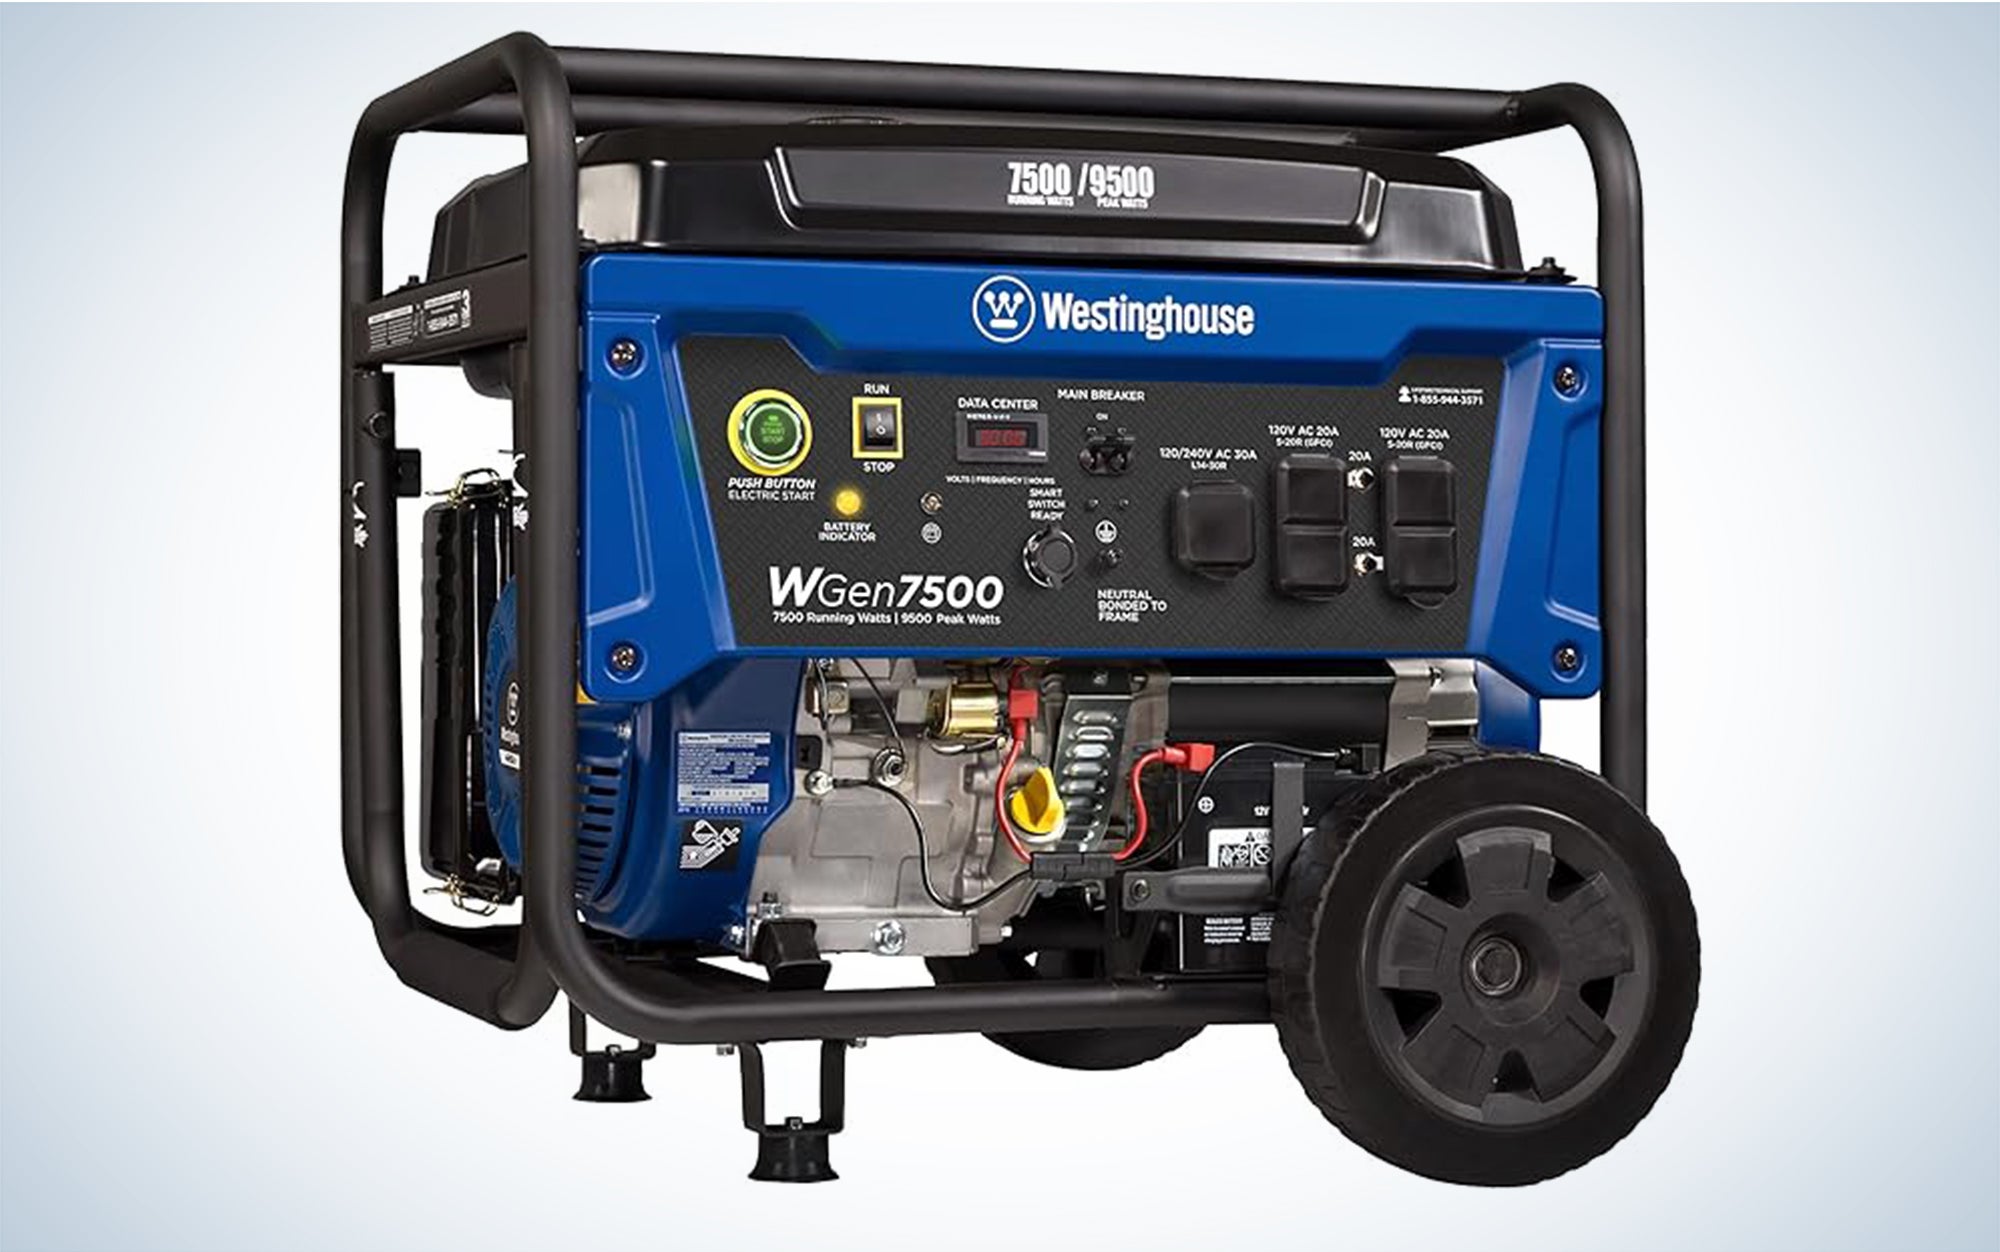 We tested the Westinghouse WGen7500.